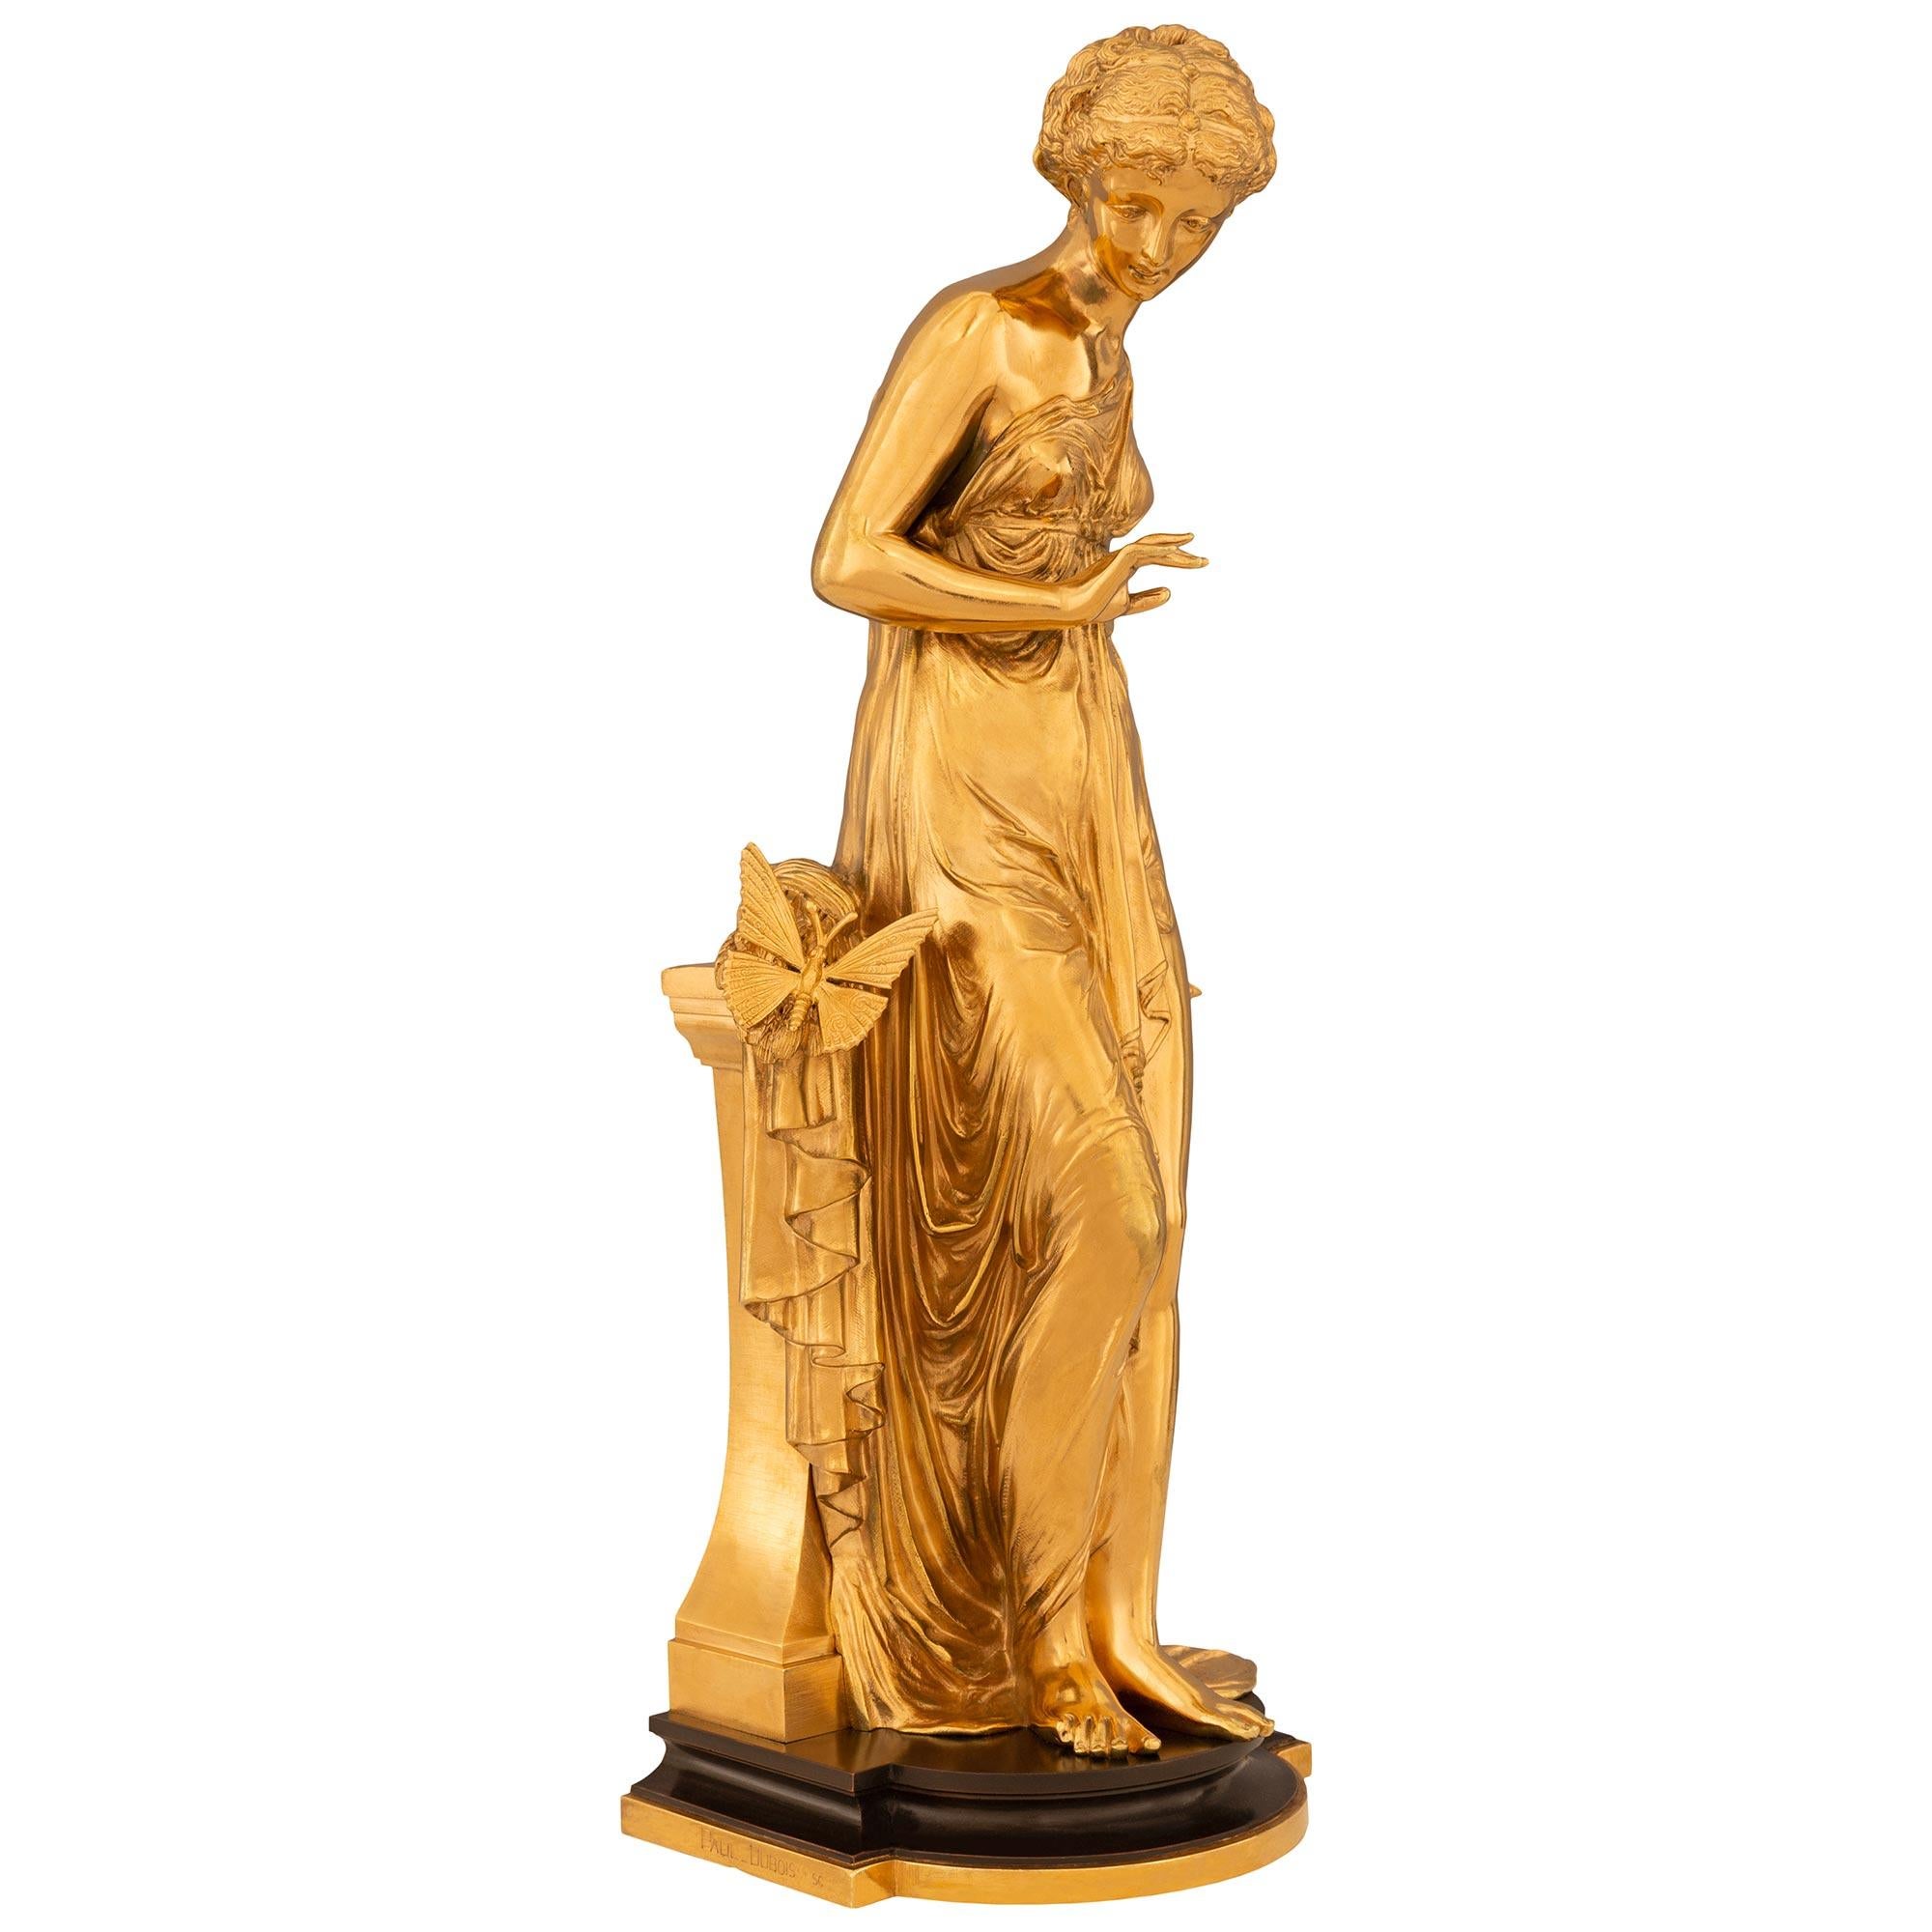 An elegant and high quality true pair of French 19th century Neo-Classical st. Ormolu and patinated Bronze statues, signed Paul Dubois. Each beautiful maiden is raised by an Ormolu and patinated Bronze stepped platform with a curved front. Each